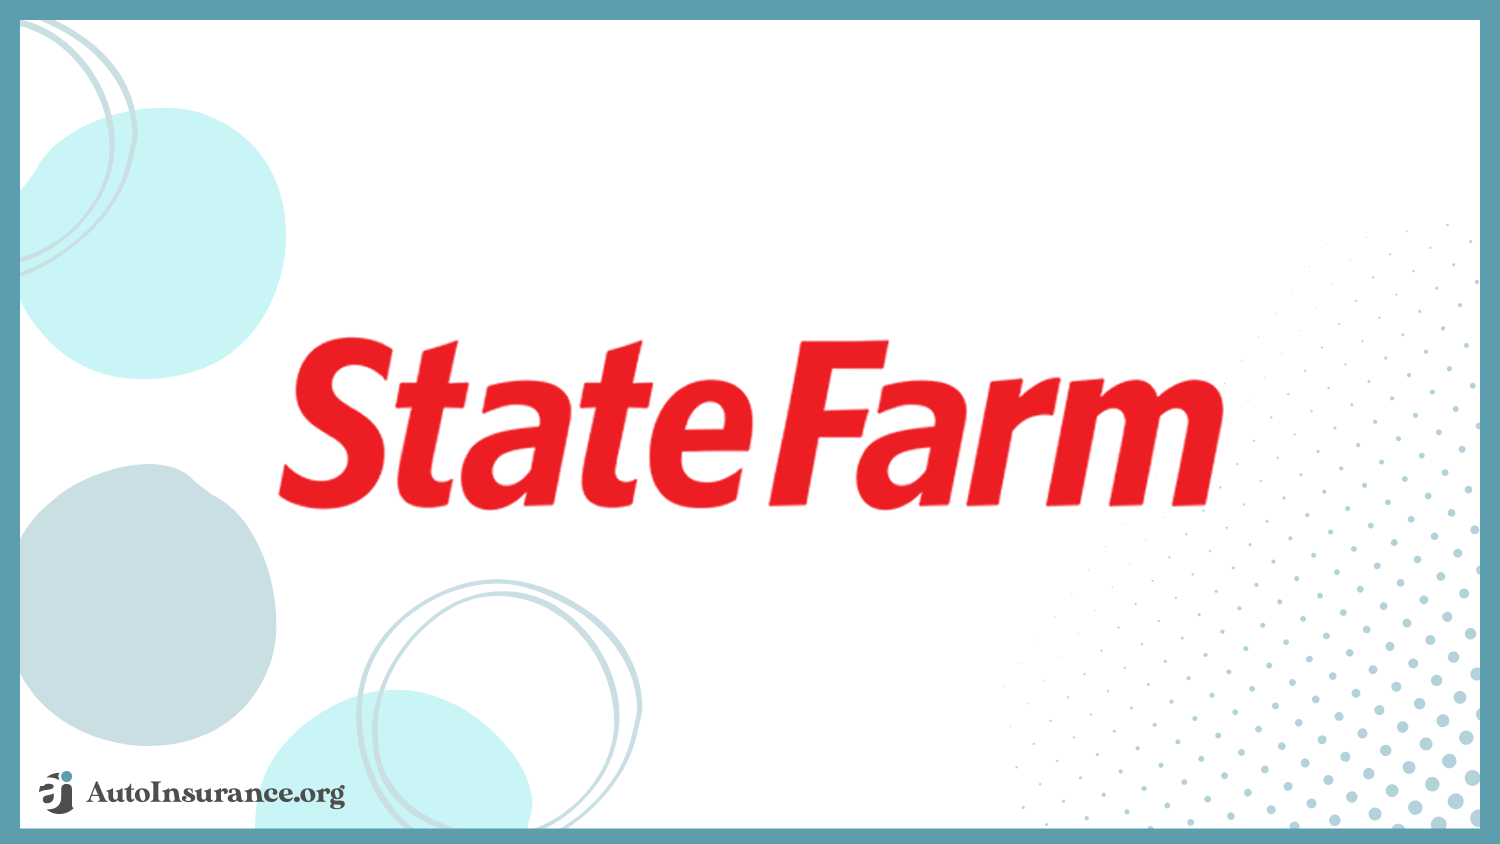 State Farm: Best Auto Insurance for Leased Vehicles